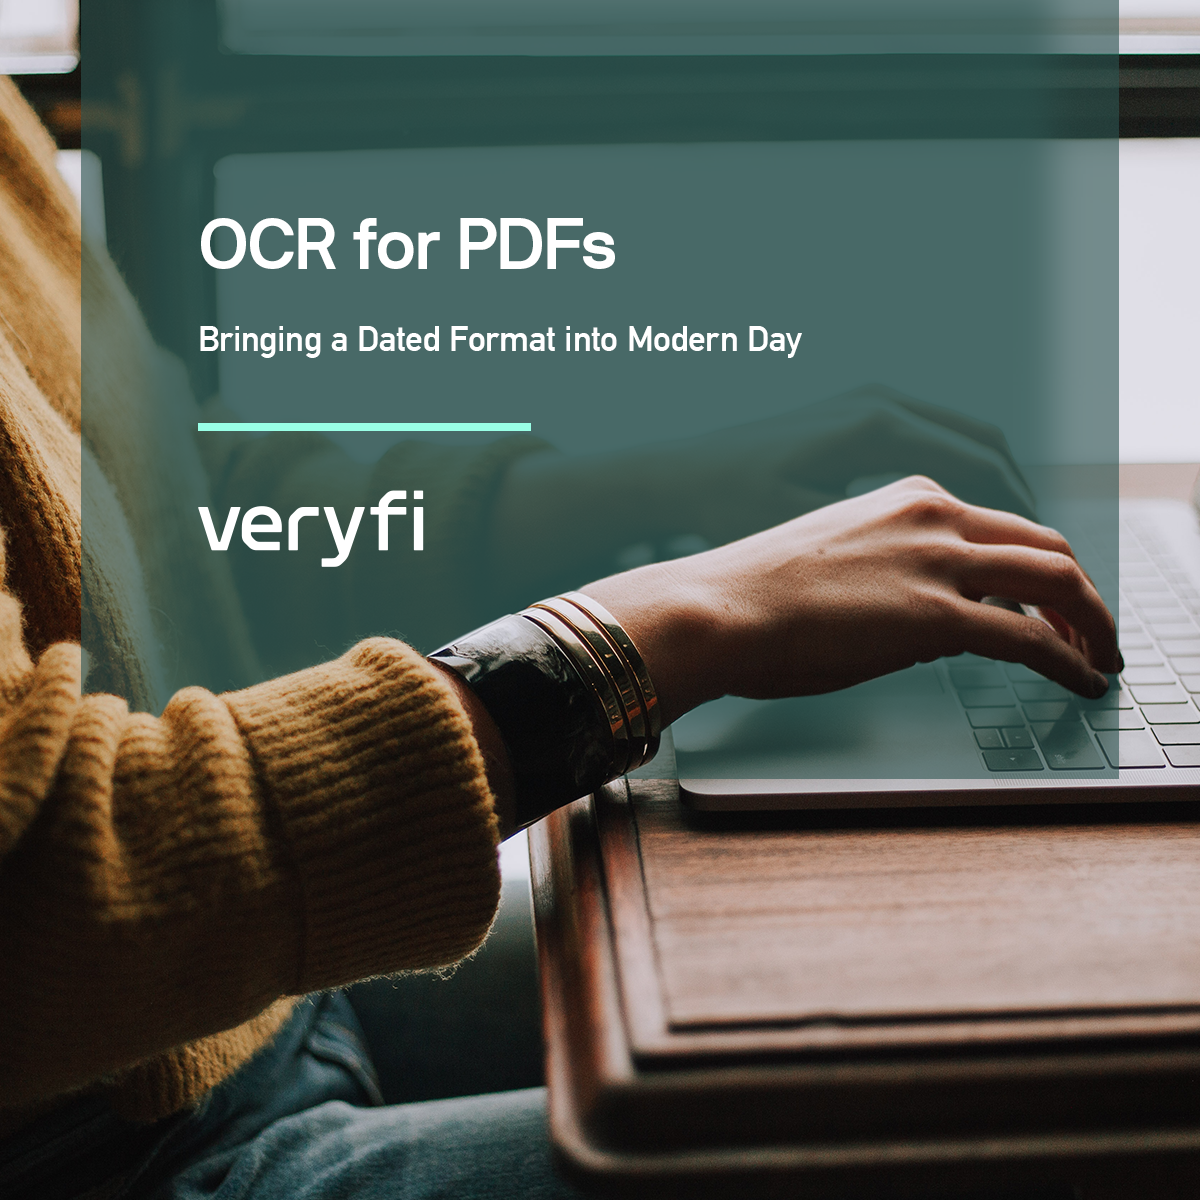 OCR for PDFs